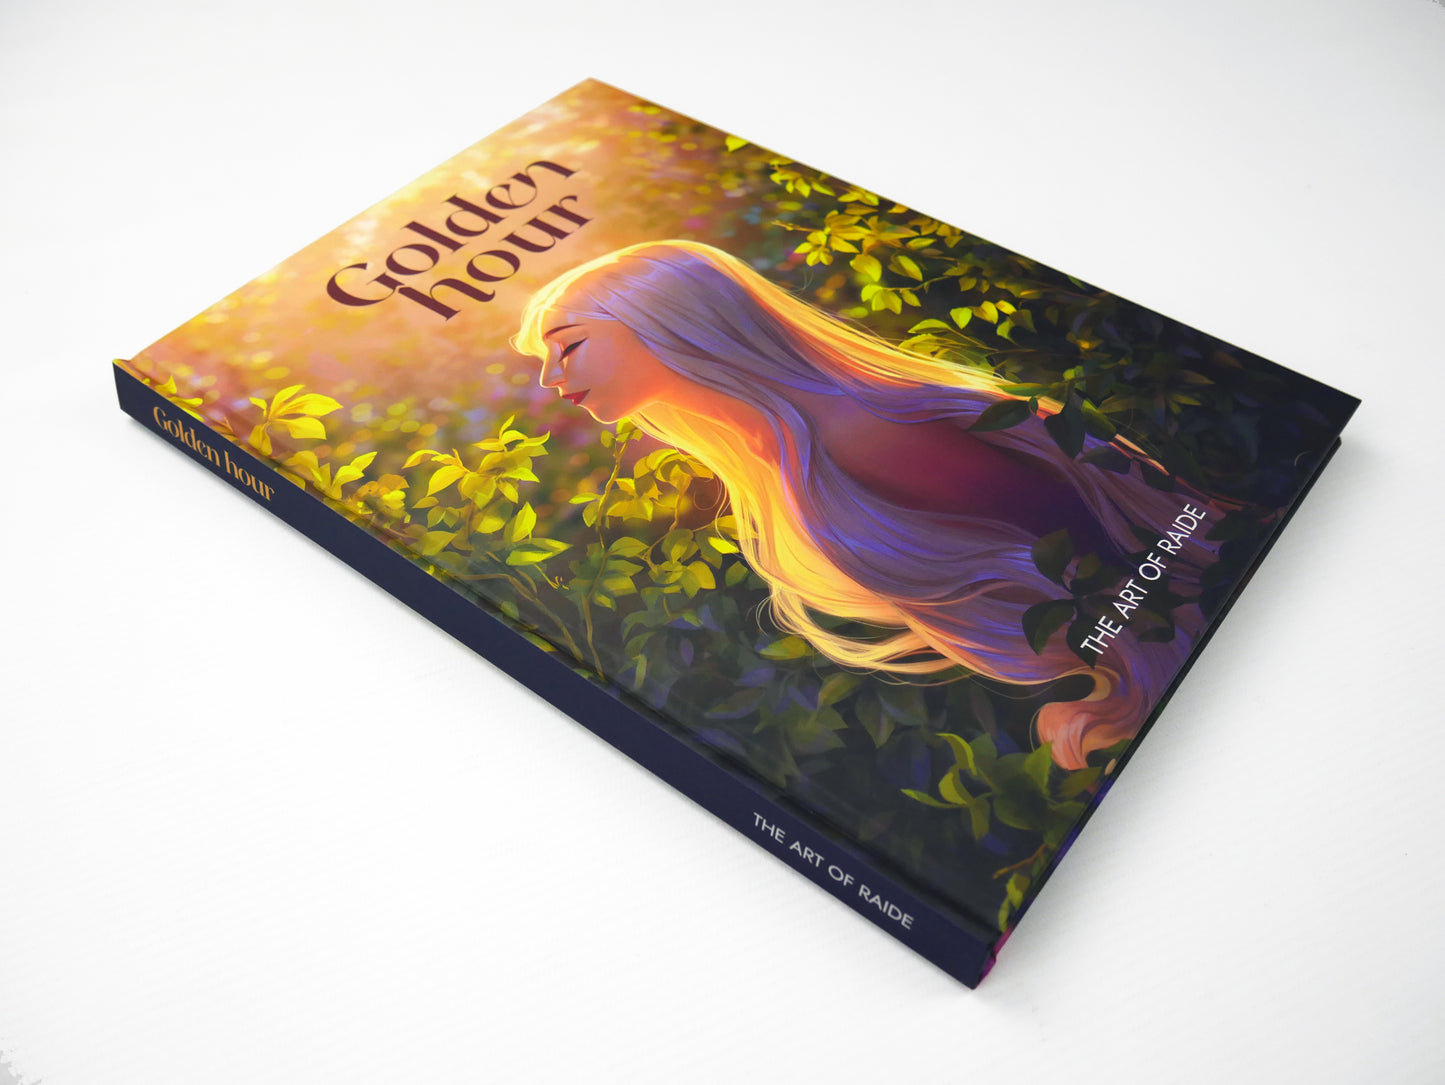 Golden Hour: The Art of Raide- with signed bookplate